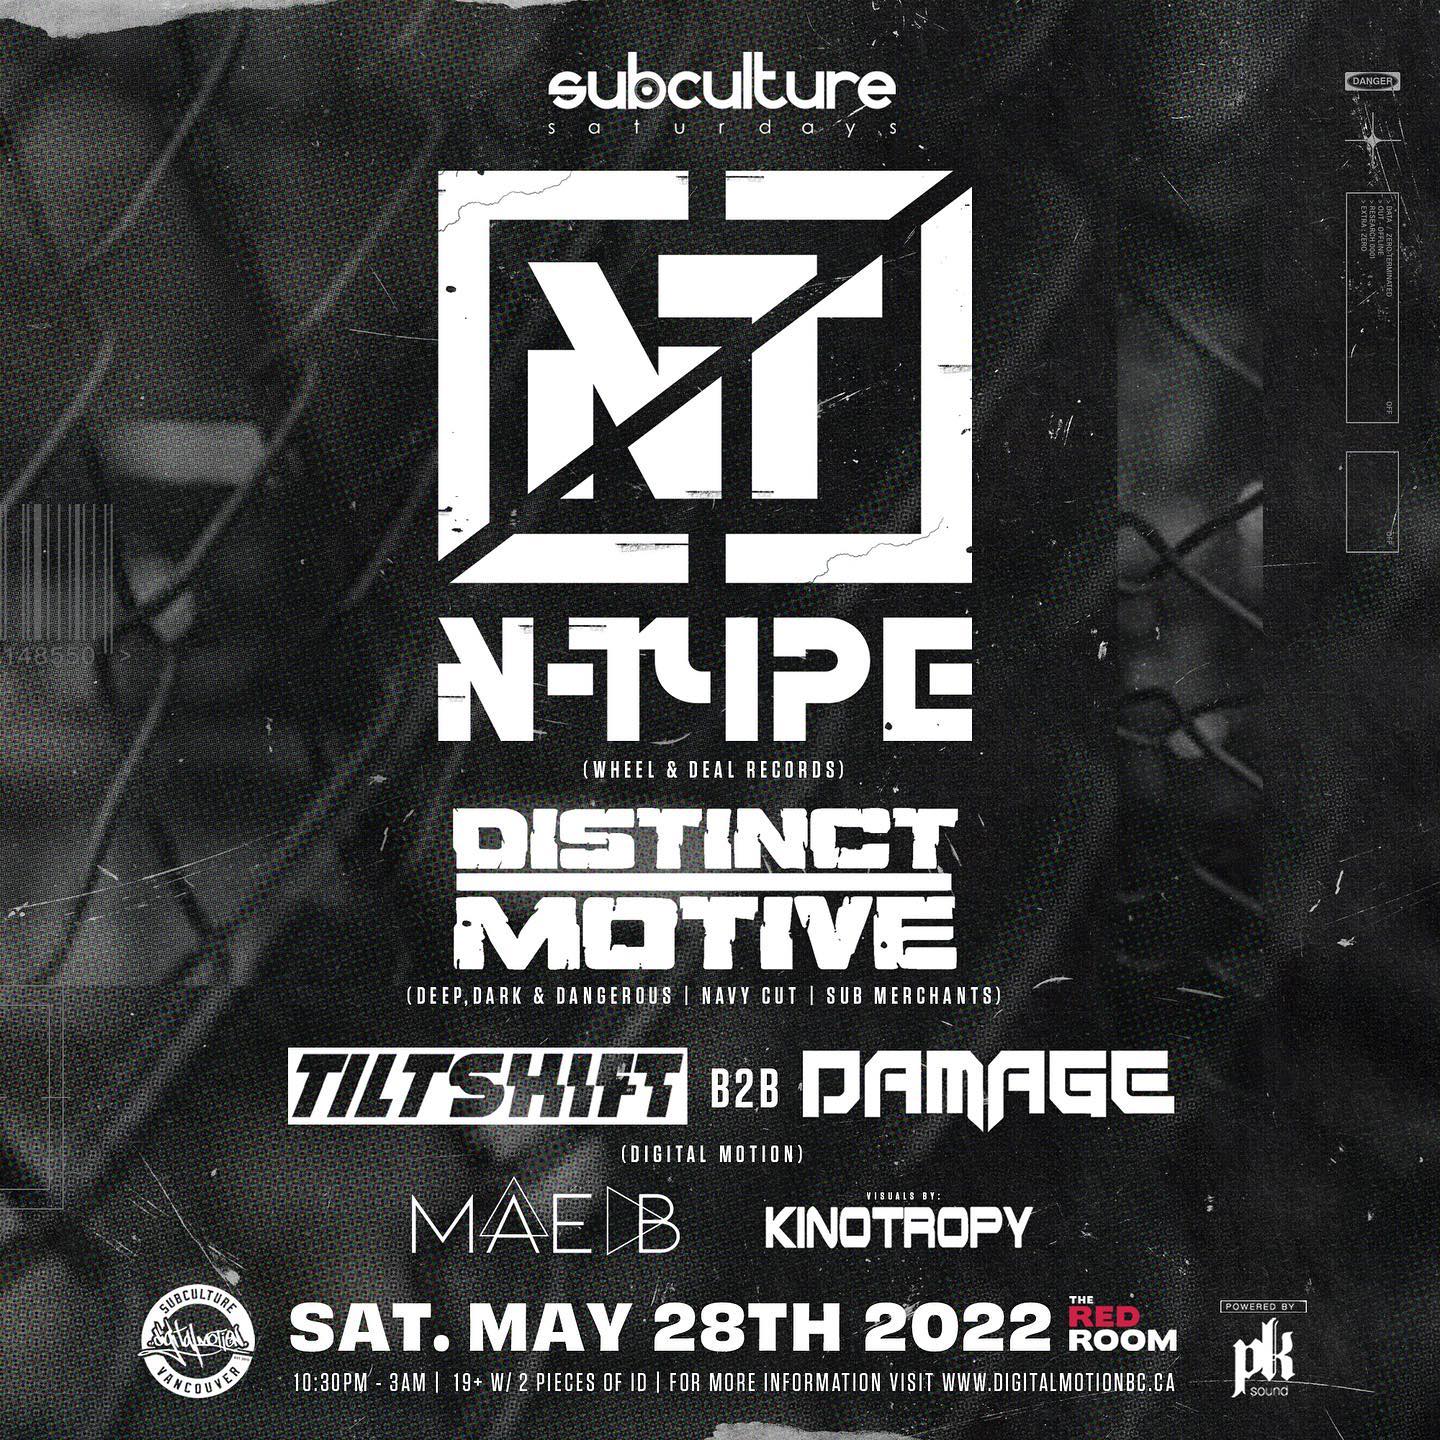 🚨show announcement🚨 We’re very excited to announce the return of @djntype & @distinctmotive to @redroomvancity May 28th! If you love dubstep (the proper stuff) & deep bass vibes you won't want to miss this fantastic double header on one of the baddest sound systems in all of Vancity! Early bird tickets are now available. 🔊🎶💯🚨🎉